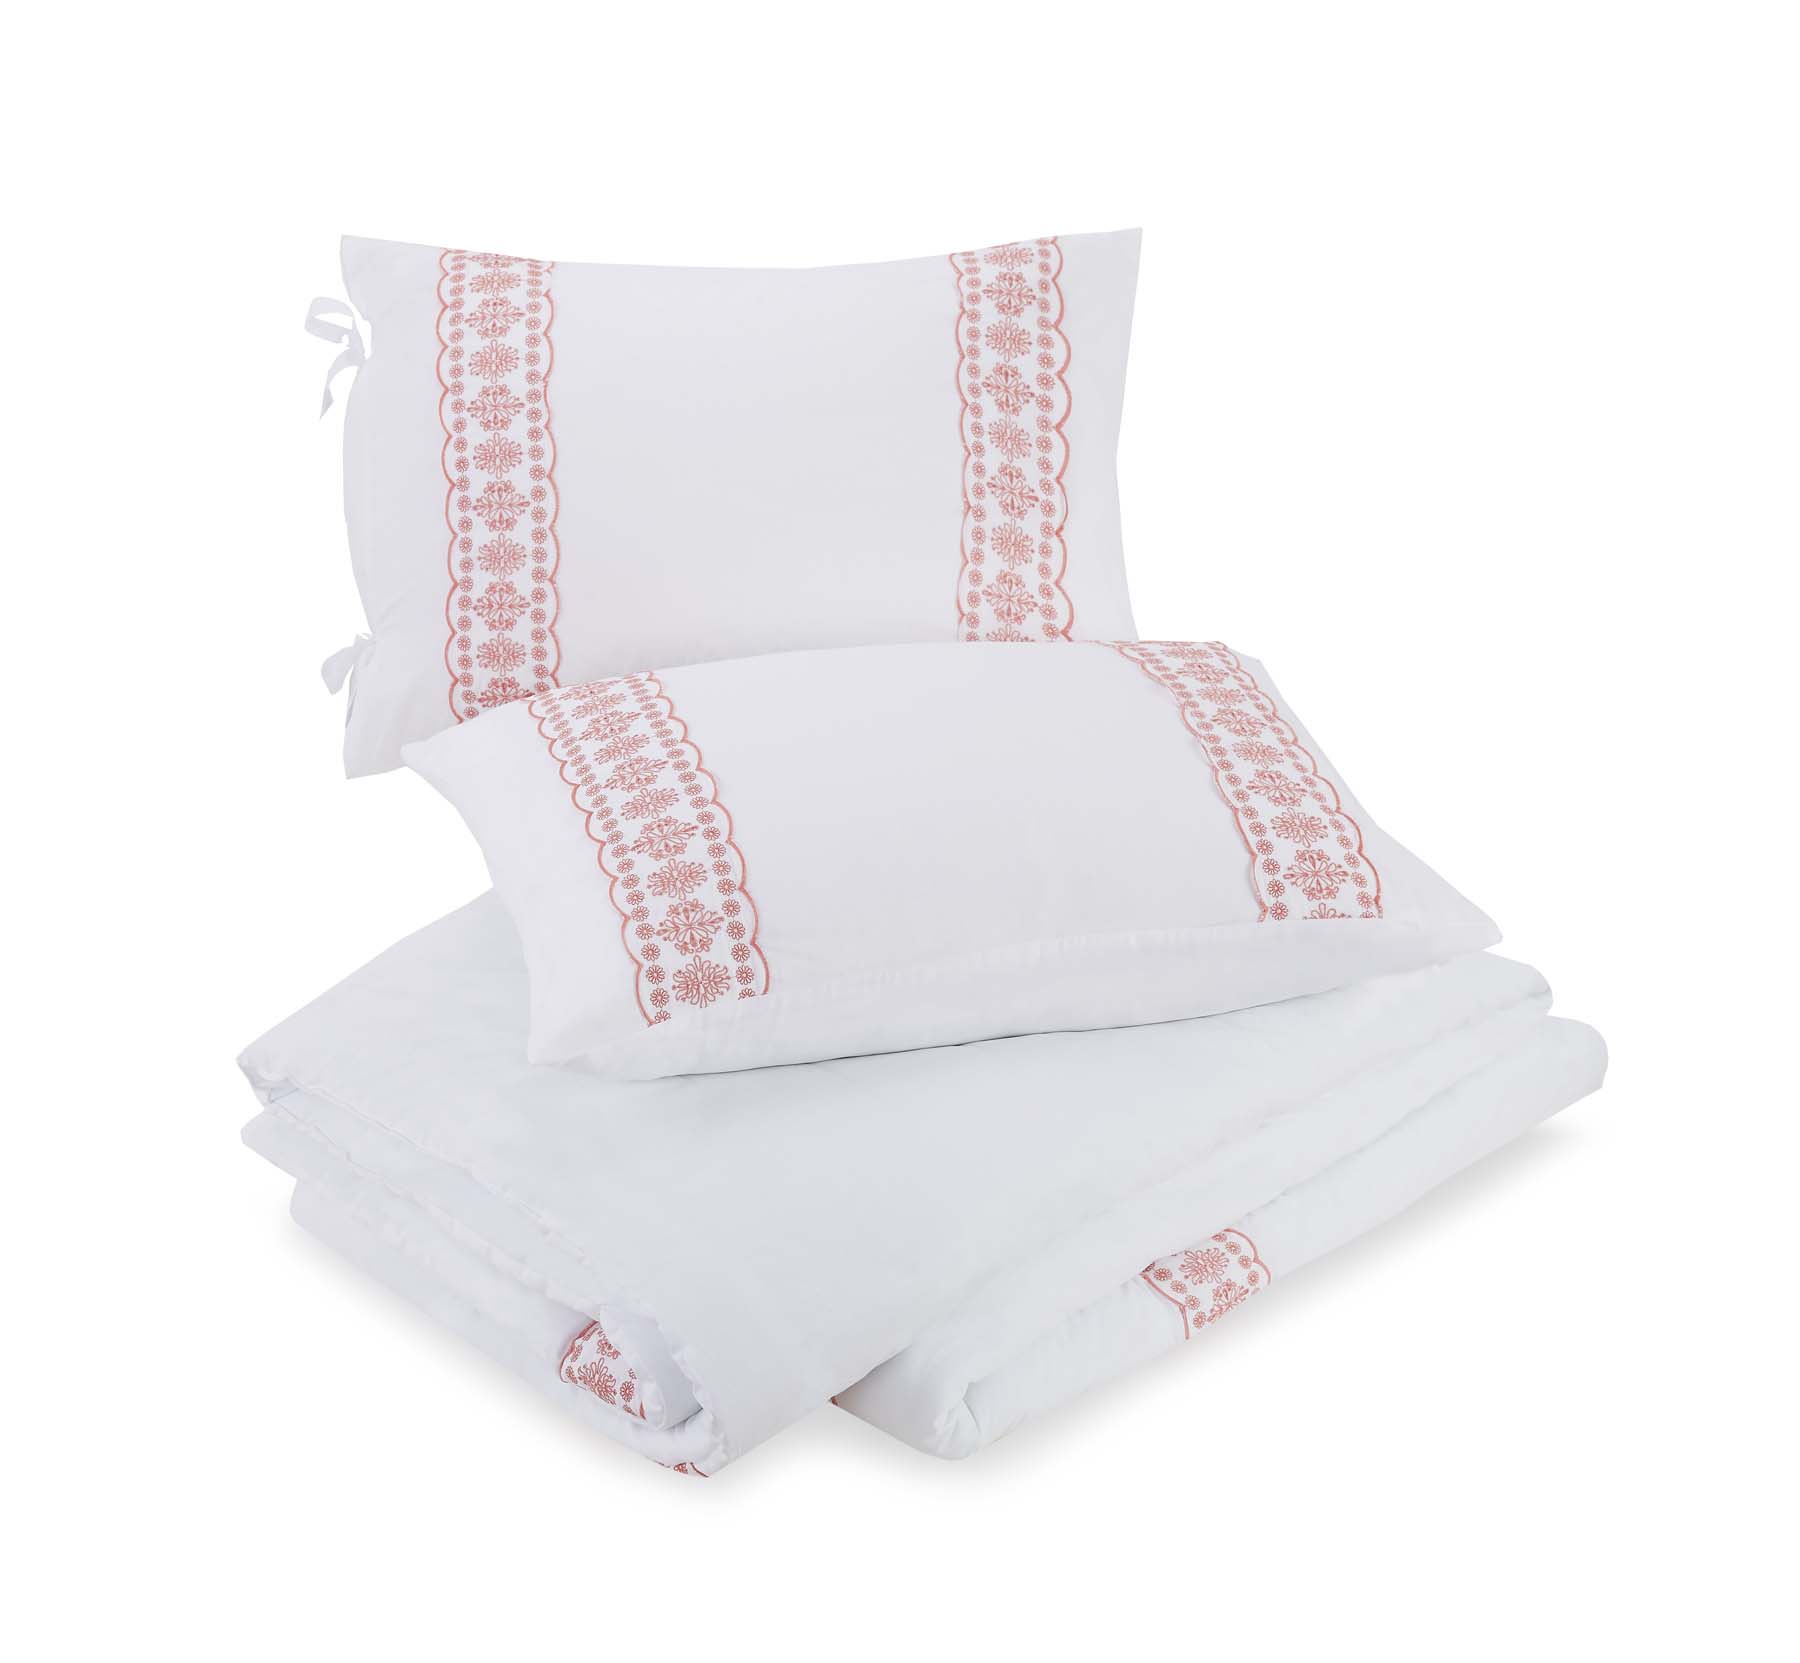 The Pioneer Woman White Cotton Eyelet 4-Piece Comforter Set, Full / Queen - image 2 of 9